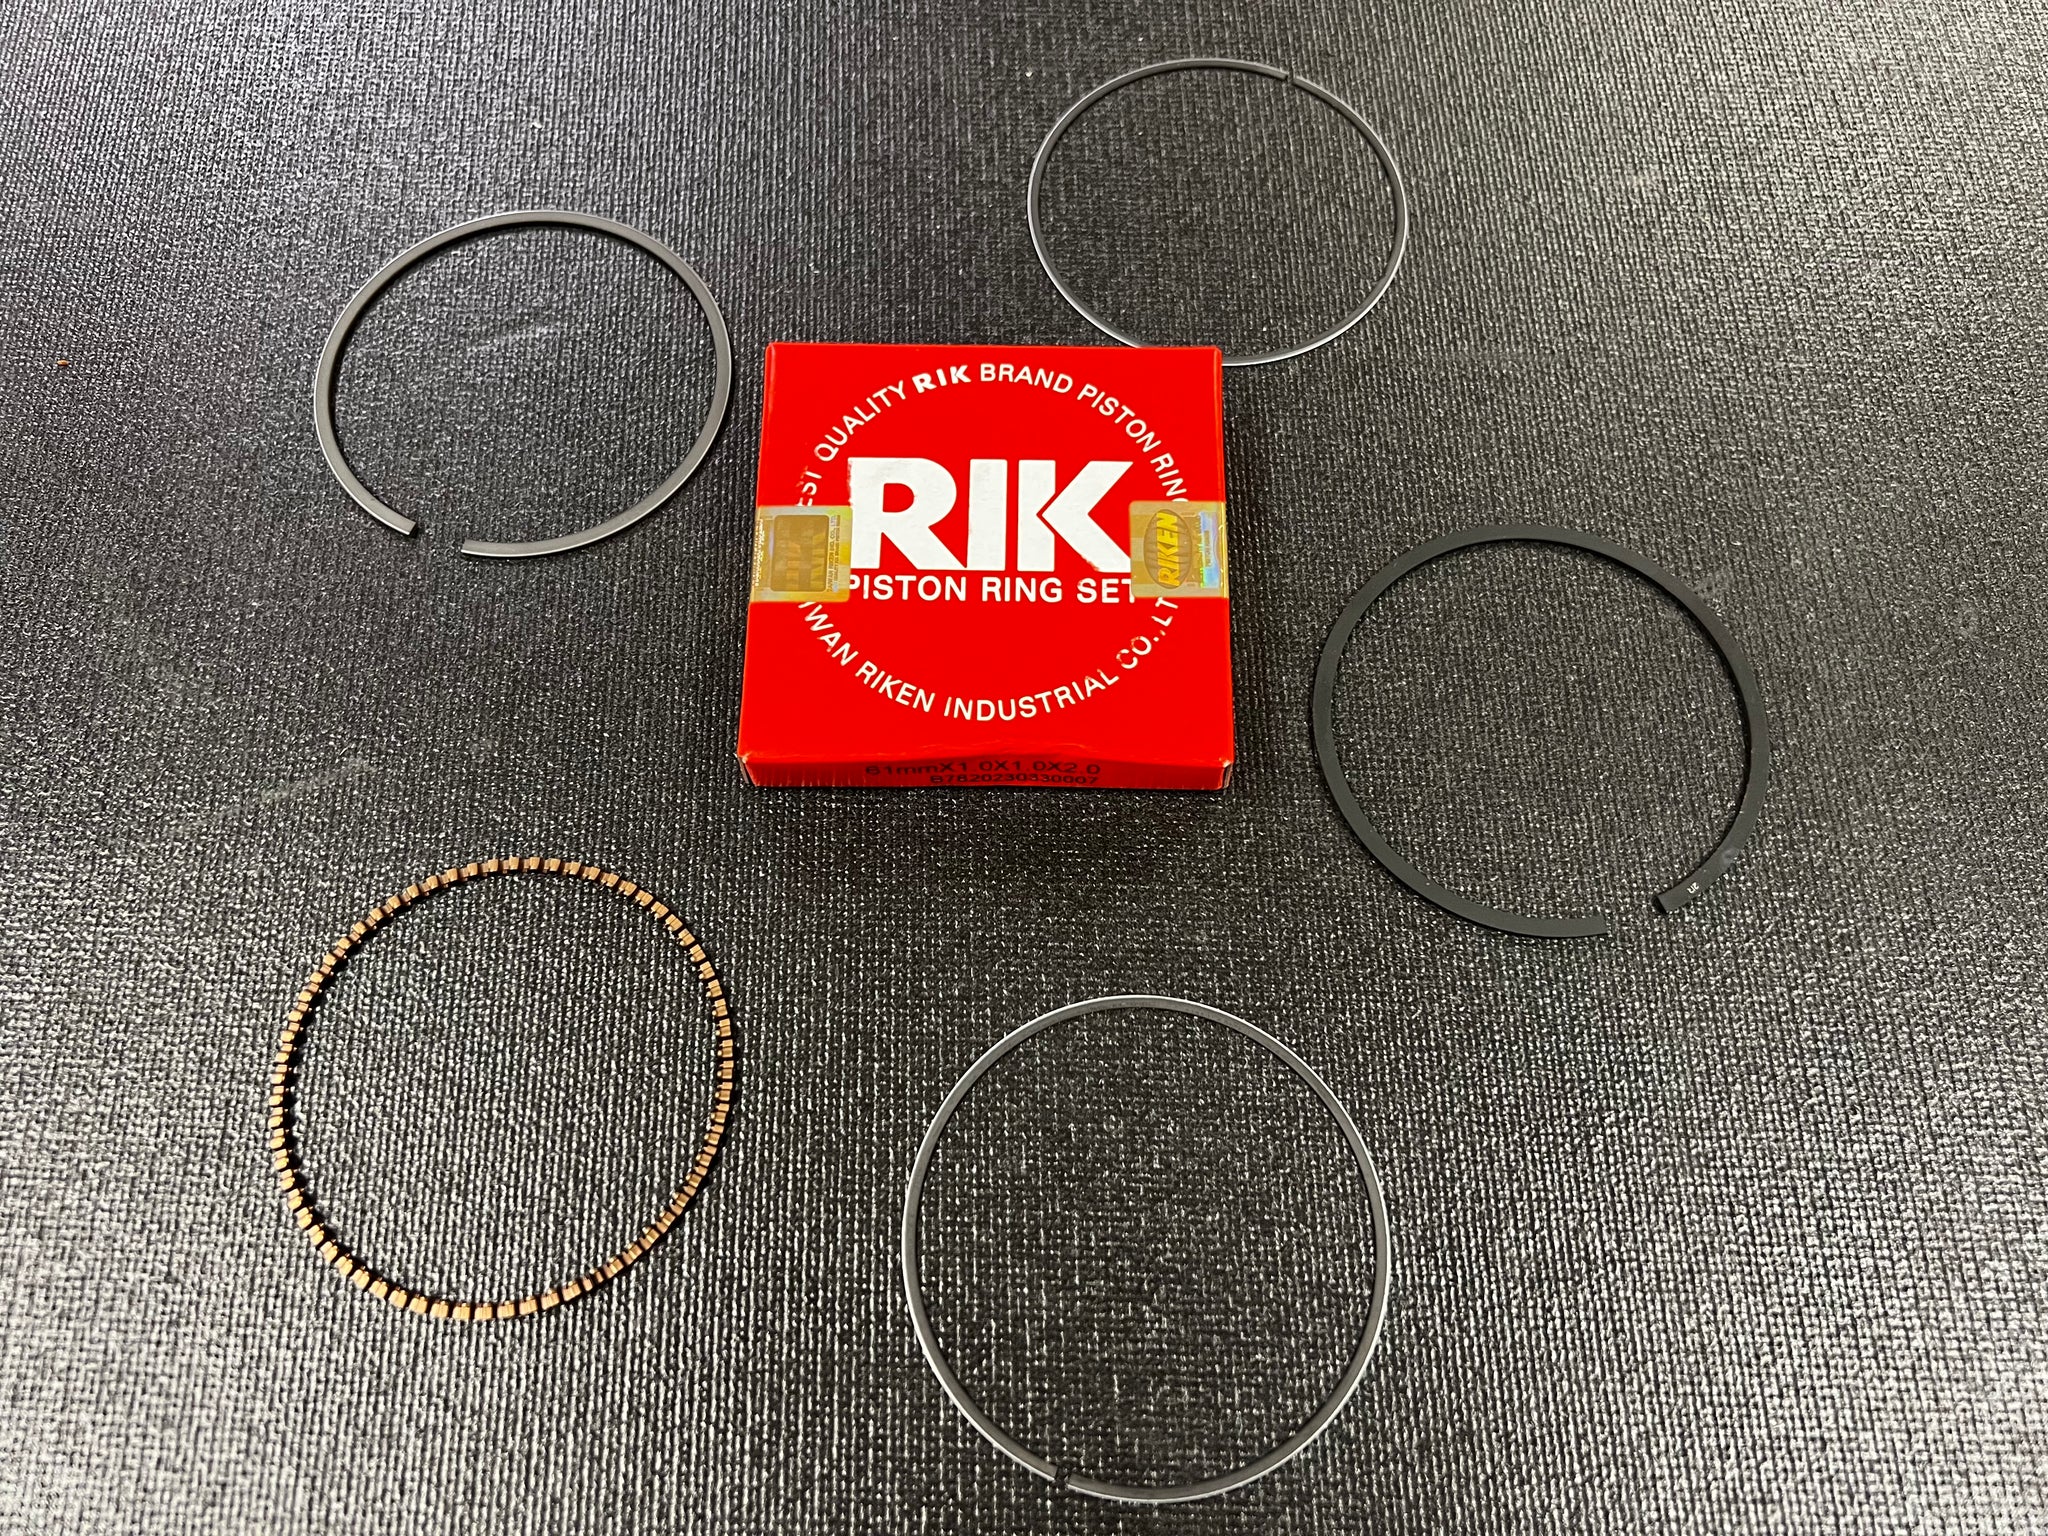 GY6 171cc / 172cc Replacement piston ring set.